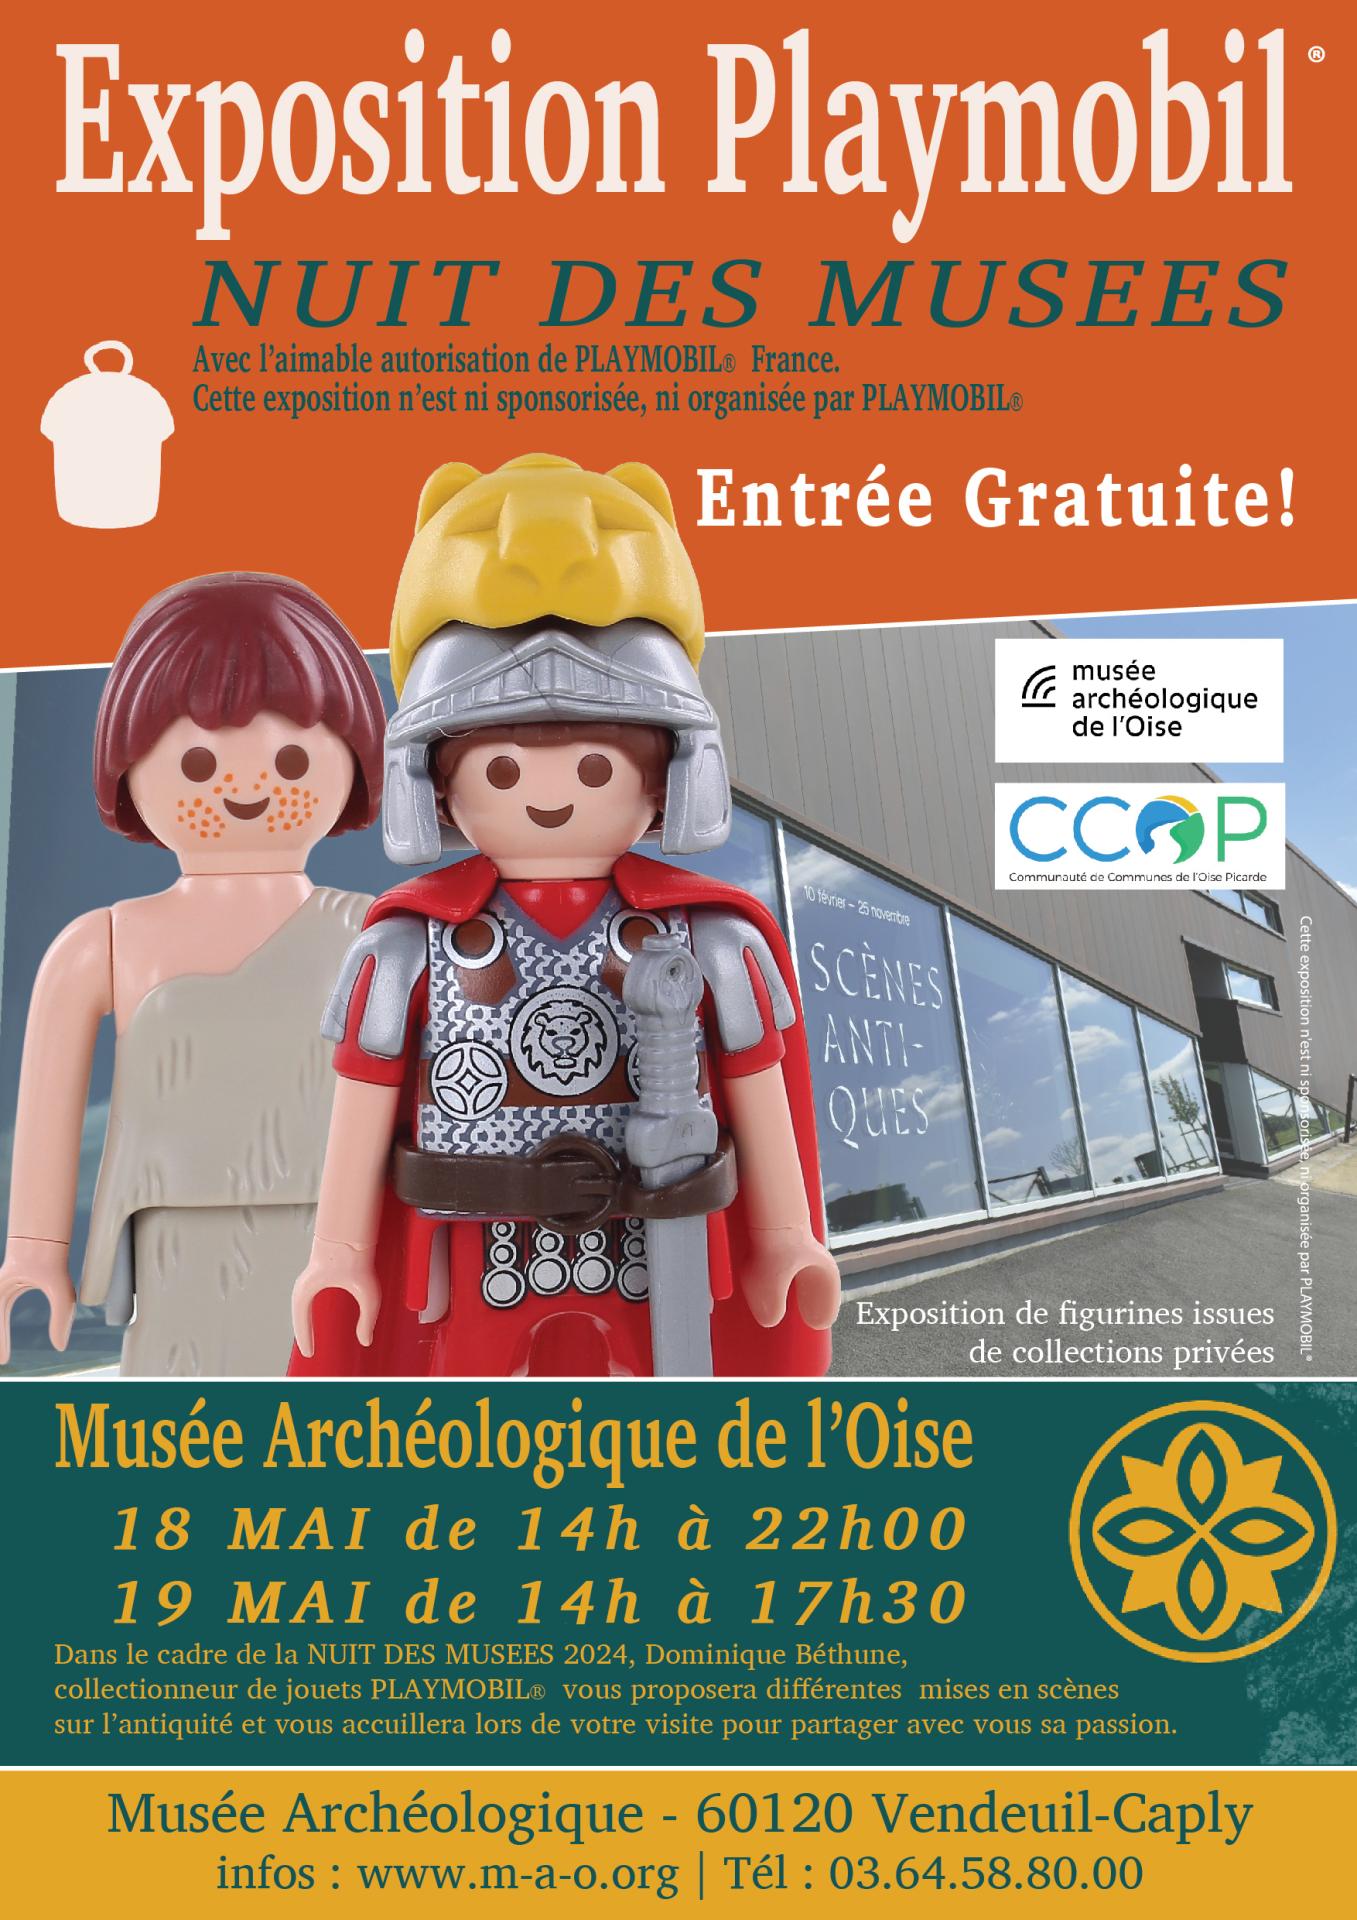 Affiche exposition playmobil vendeuil caply oise 02 01